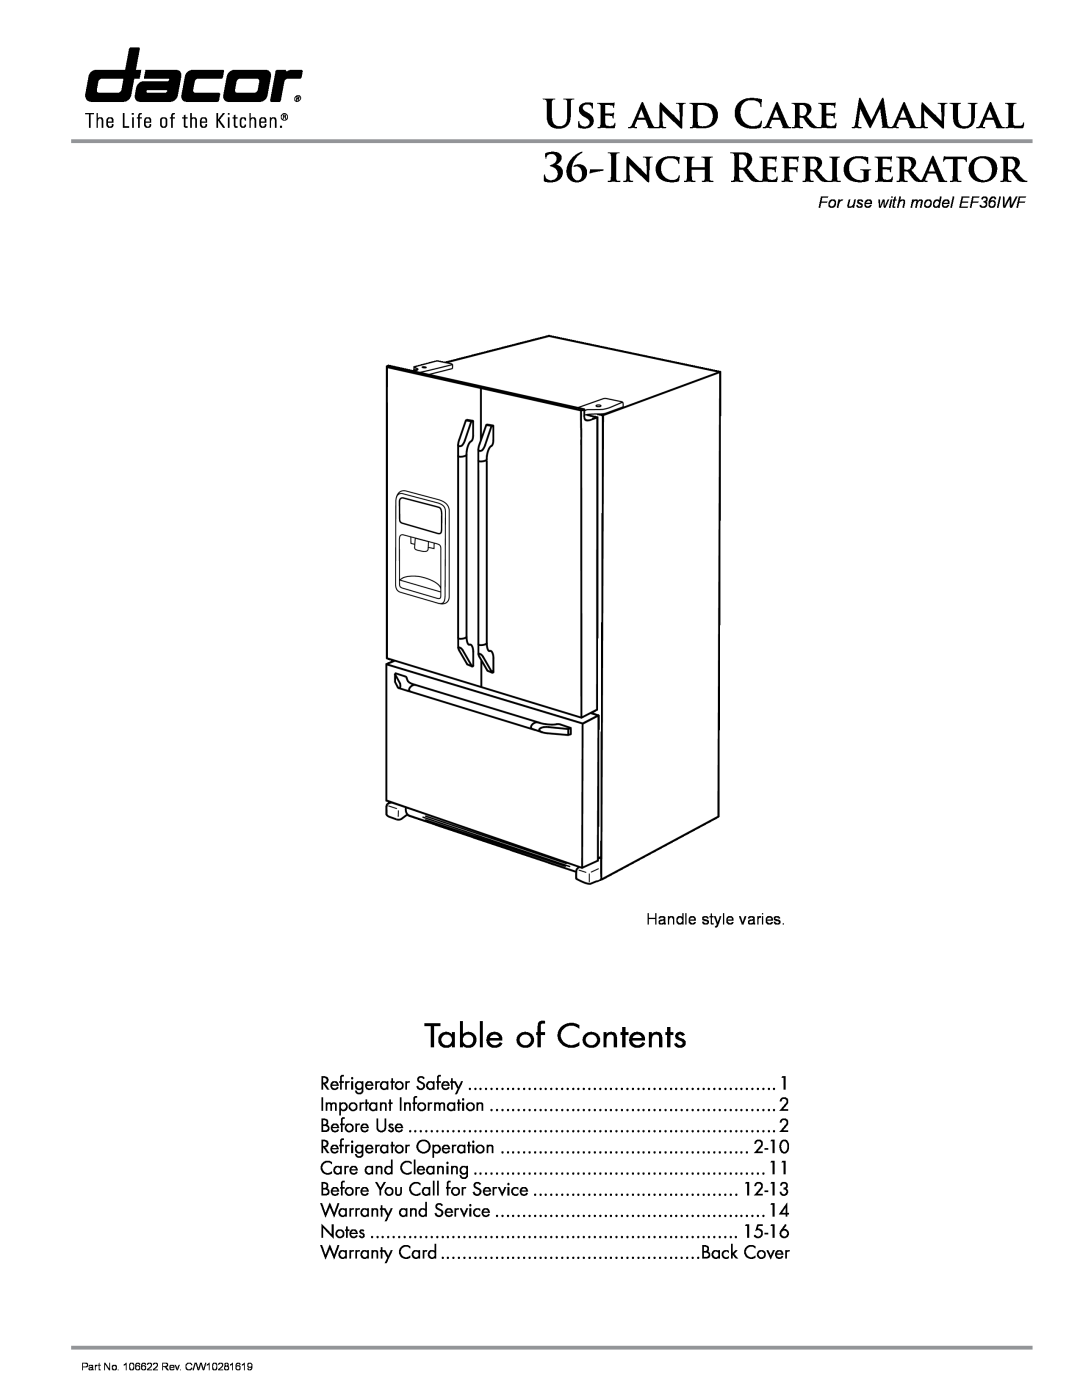 Dacor EF36IWF warranty Inch Refrigerator, Table of Contents, Use And Care Manual 